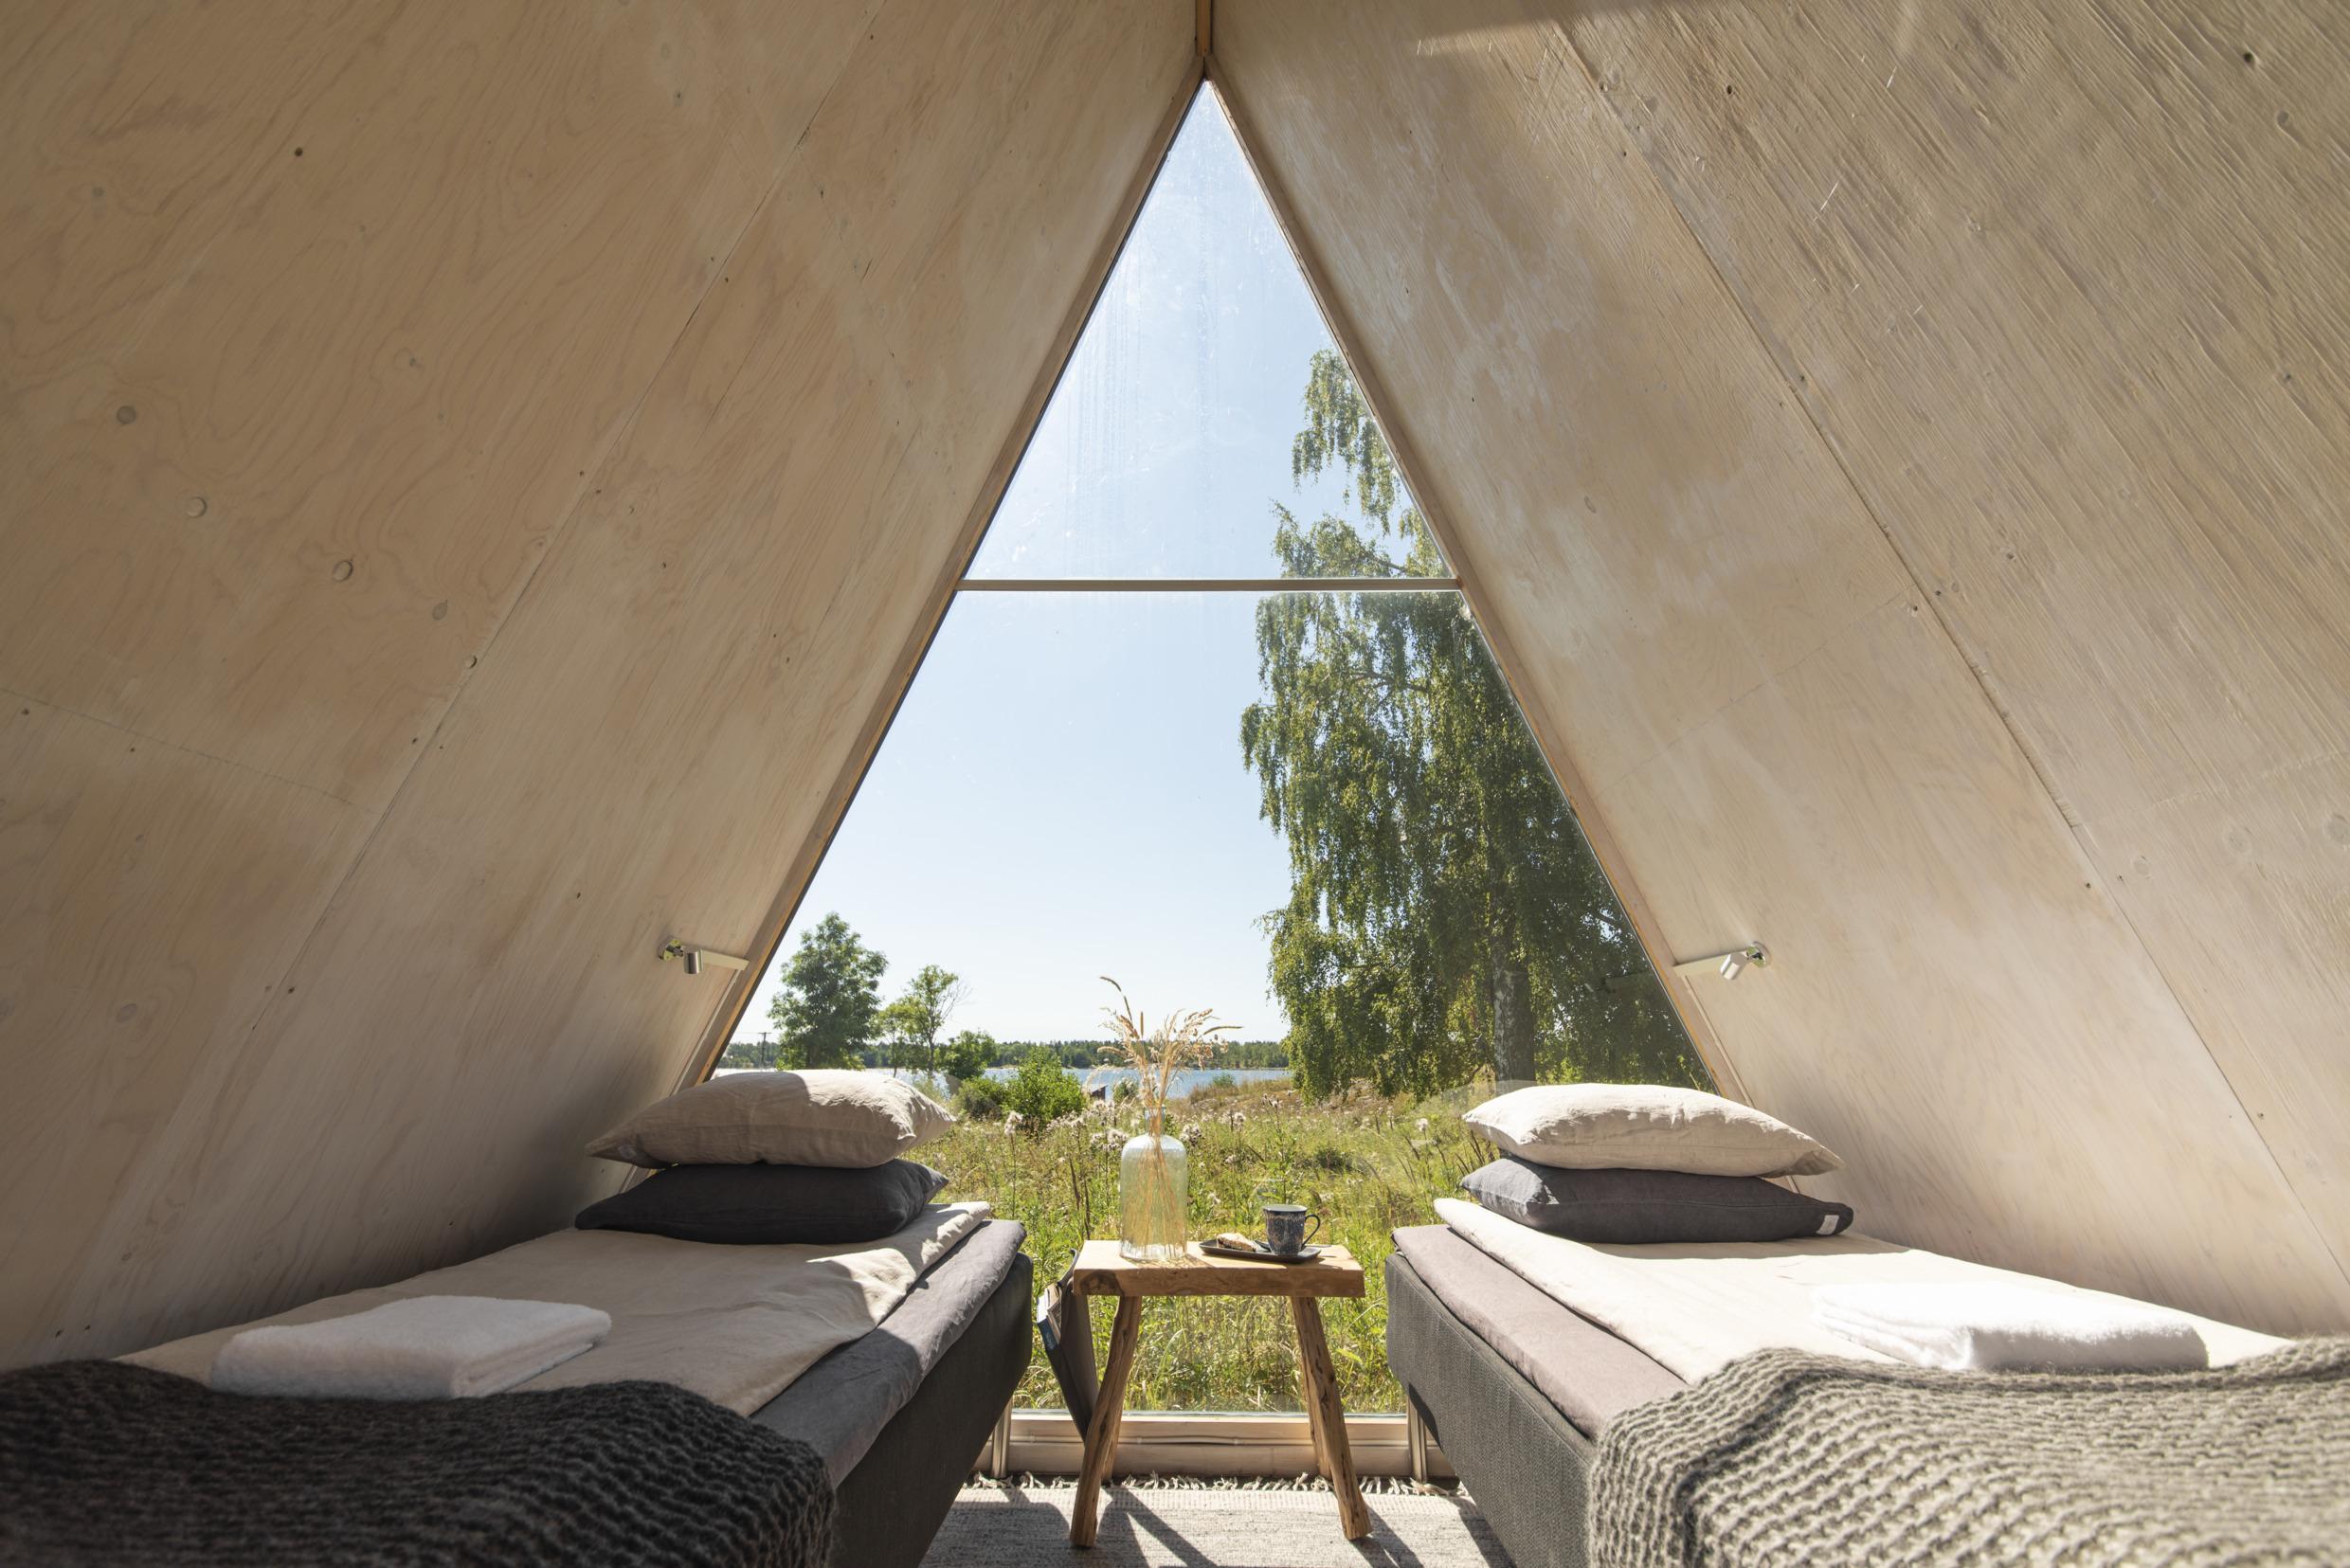 Interior view of modern beds and a bedside table inside a wooden a-frame cottage with triangular ceiling, looking out on a summer meadow of tall grass with the Baltic Sea behind it.